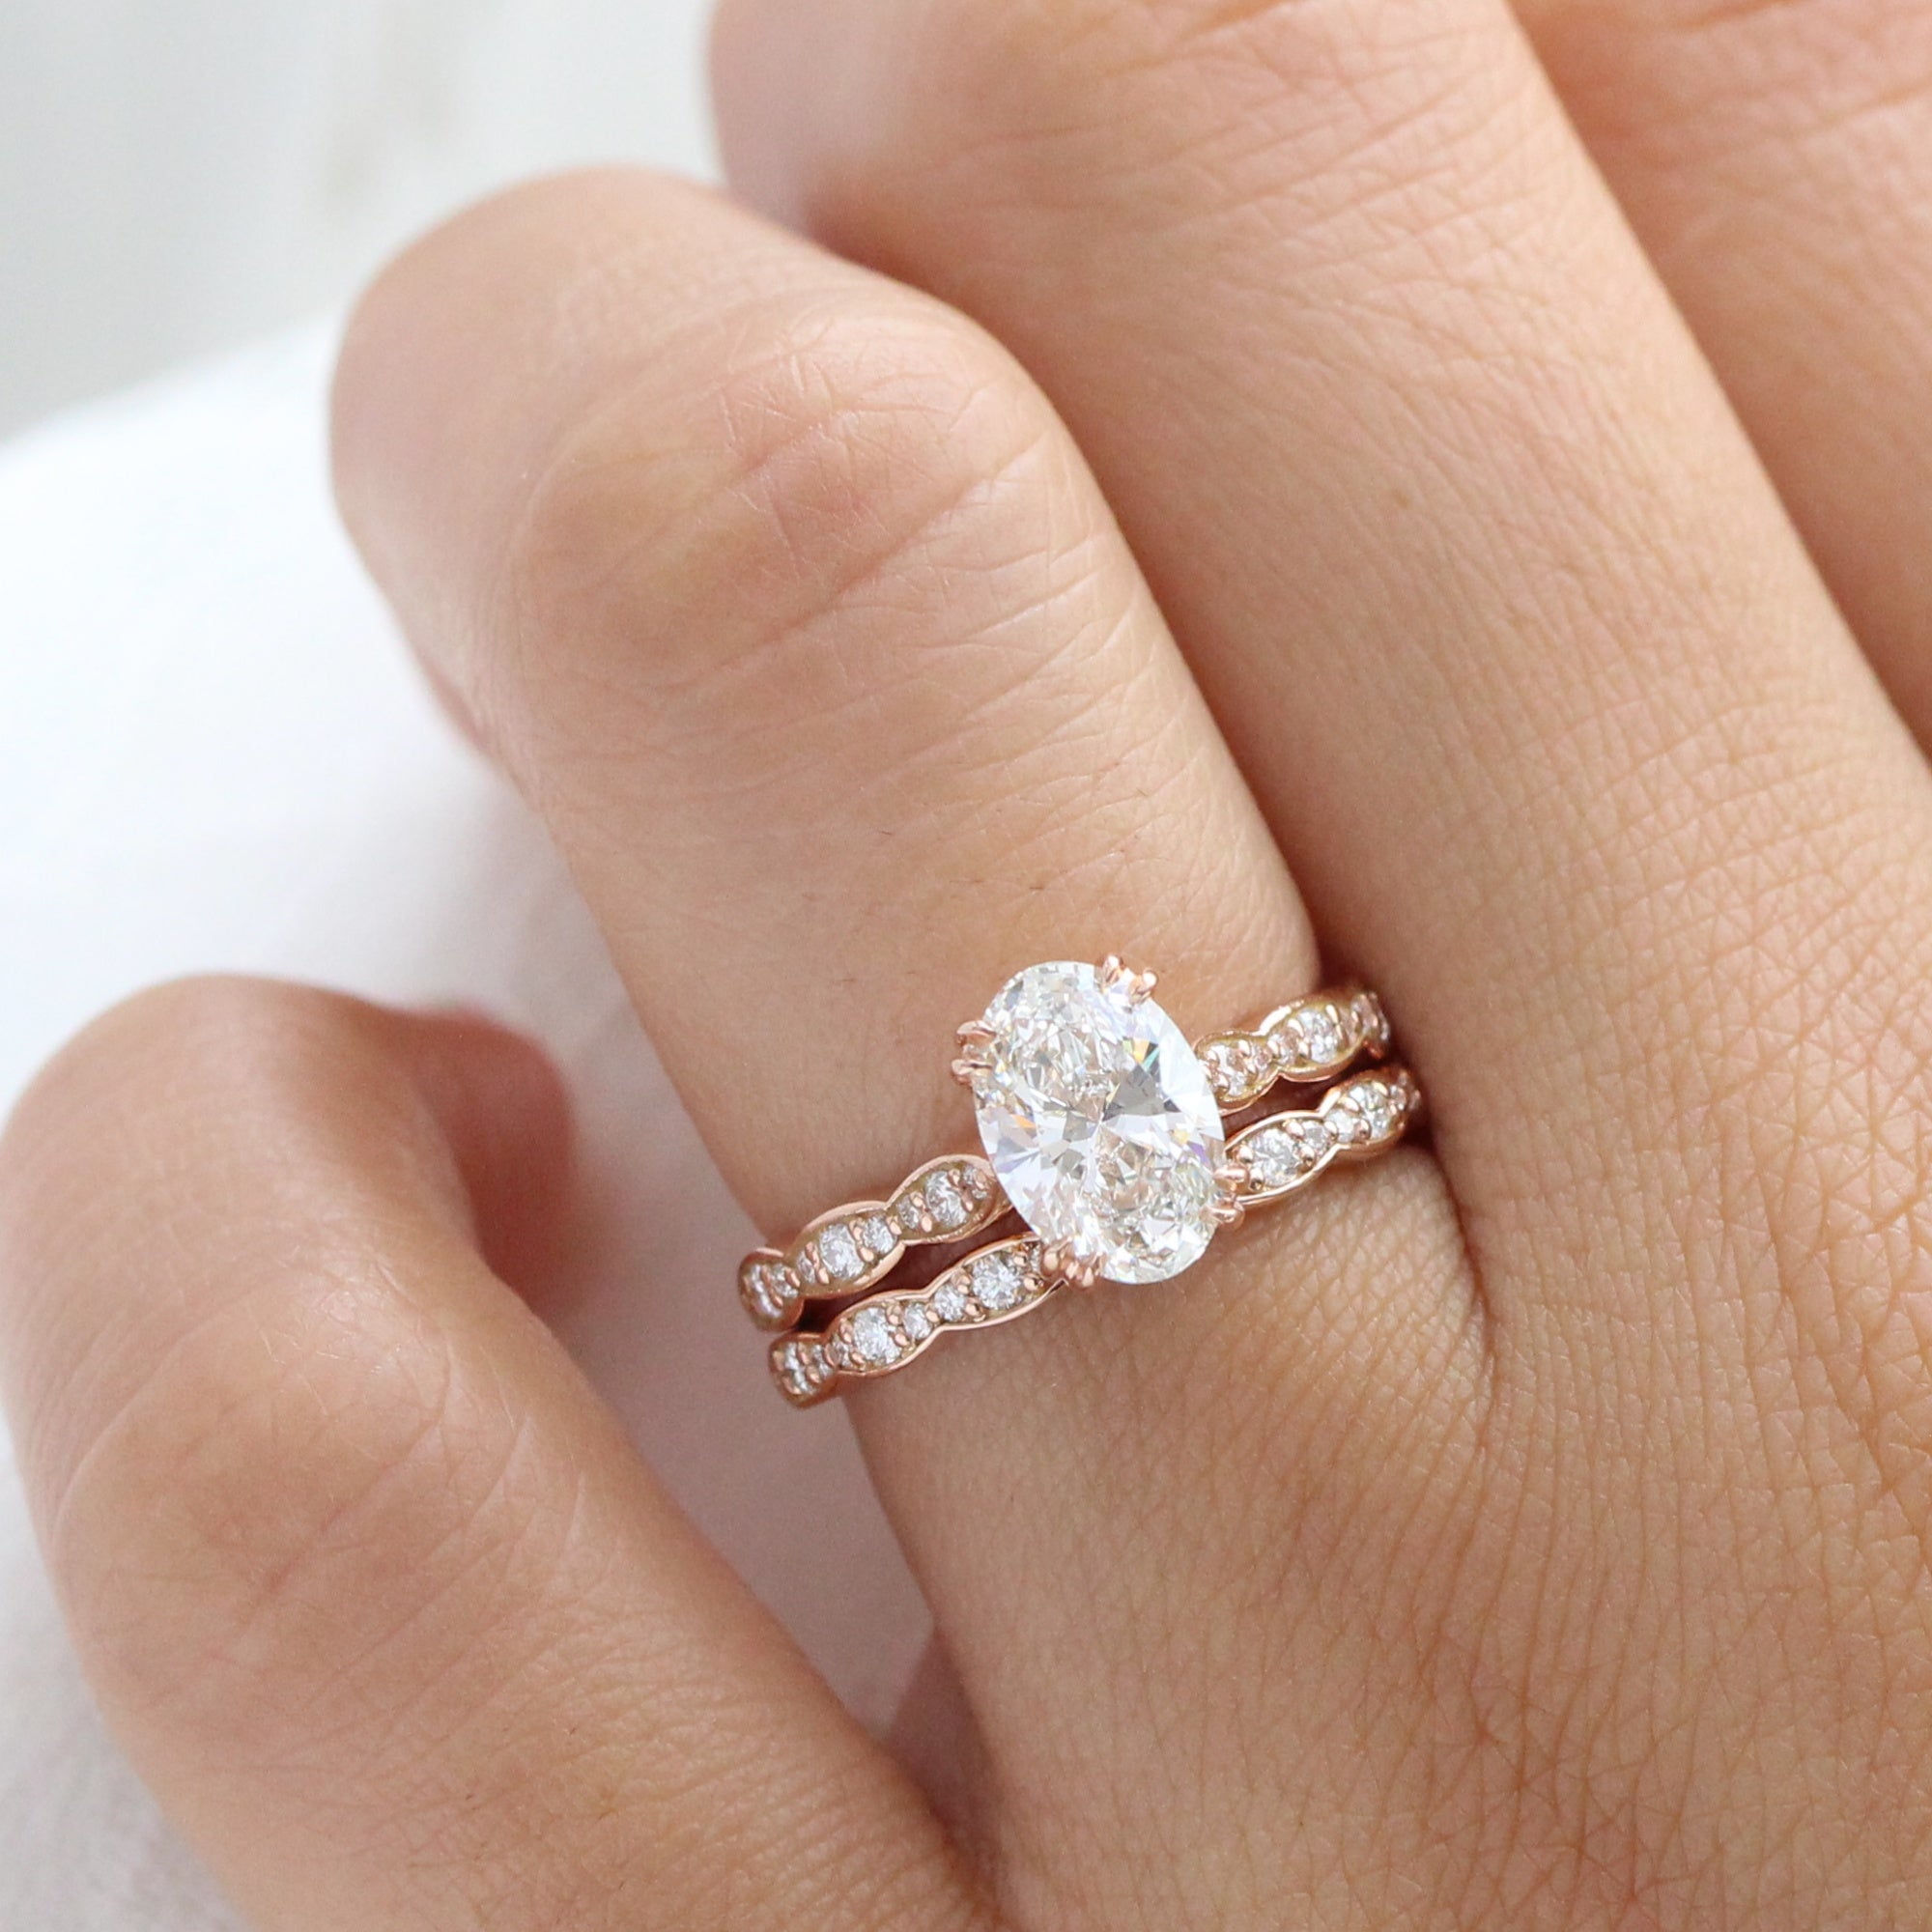 Large Oval Lab Diamond Ring Bridal Set Rose Gold Solitaire Ring